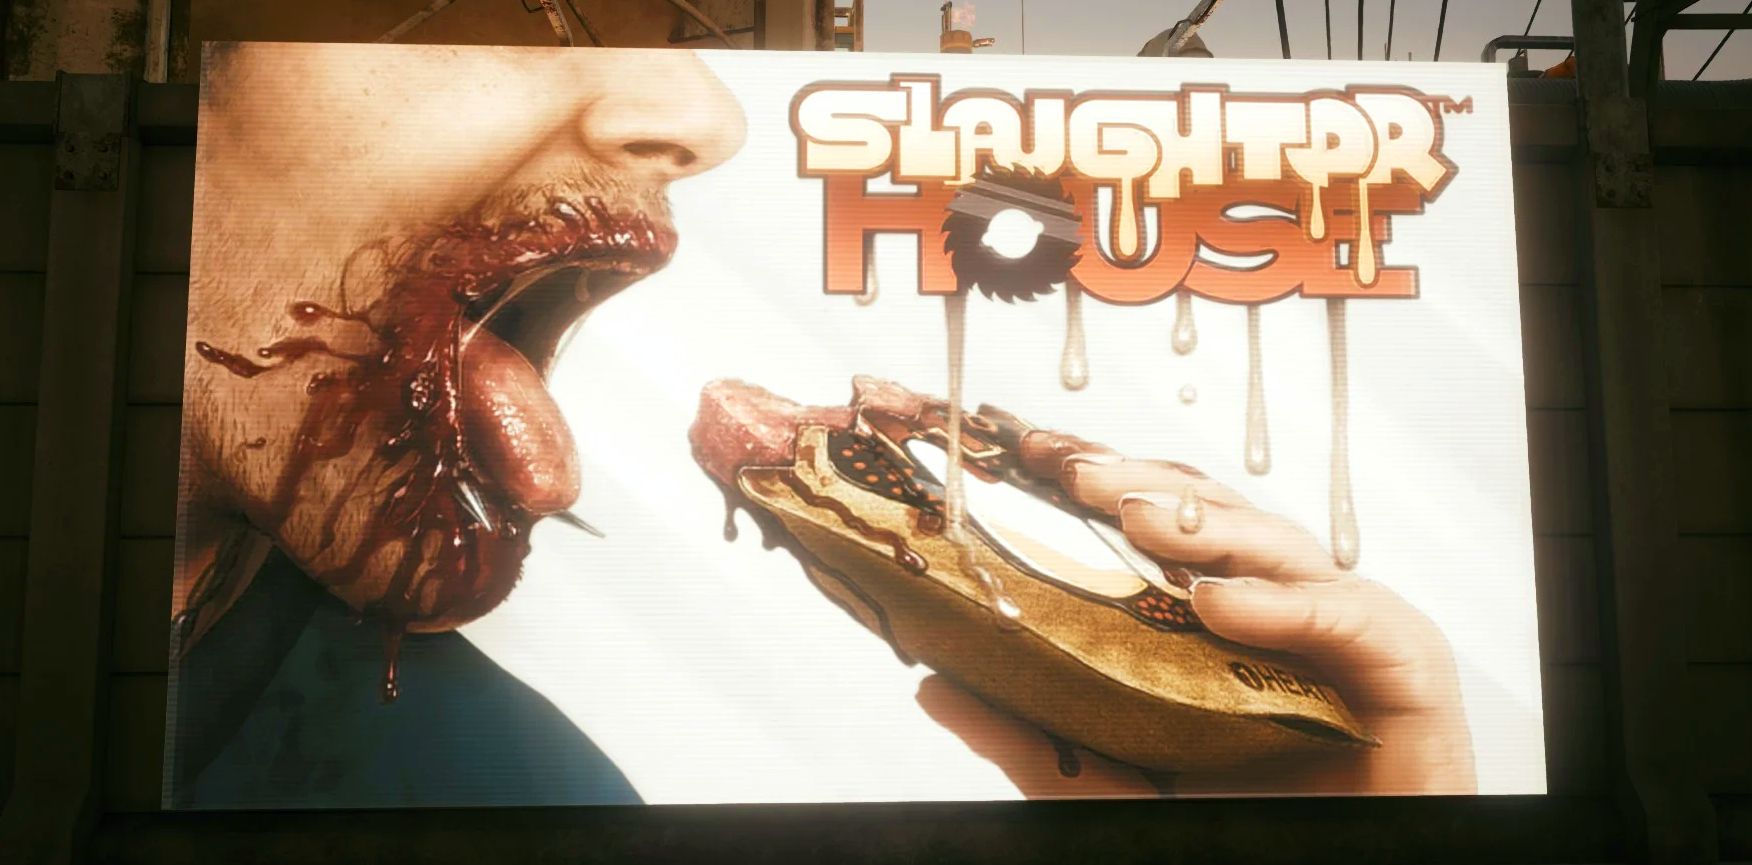 A gory advertisement for Slaughter House meat in Cyberpunk 2077.